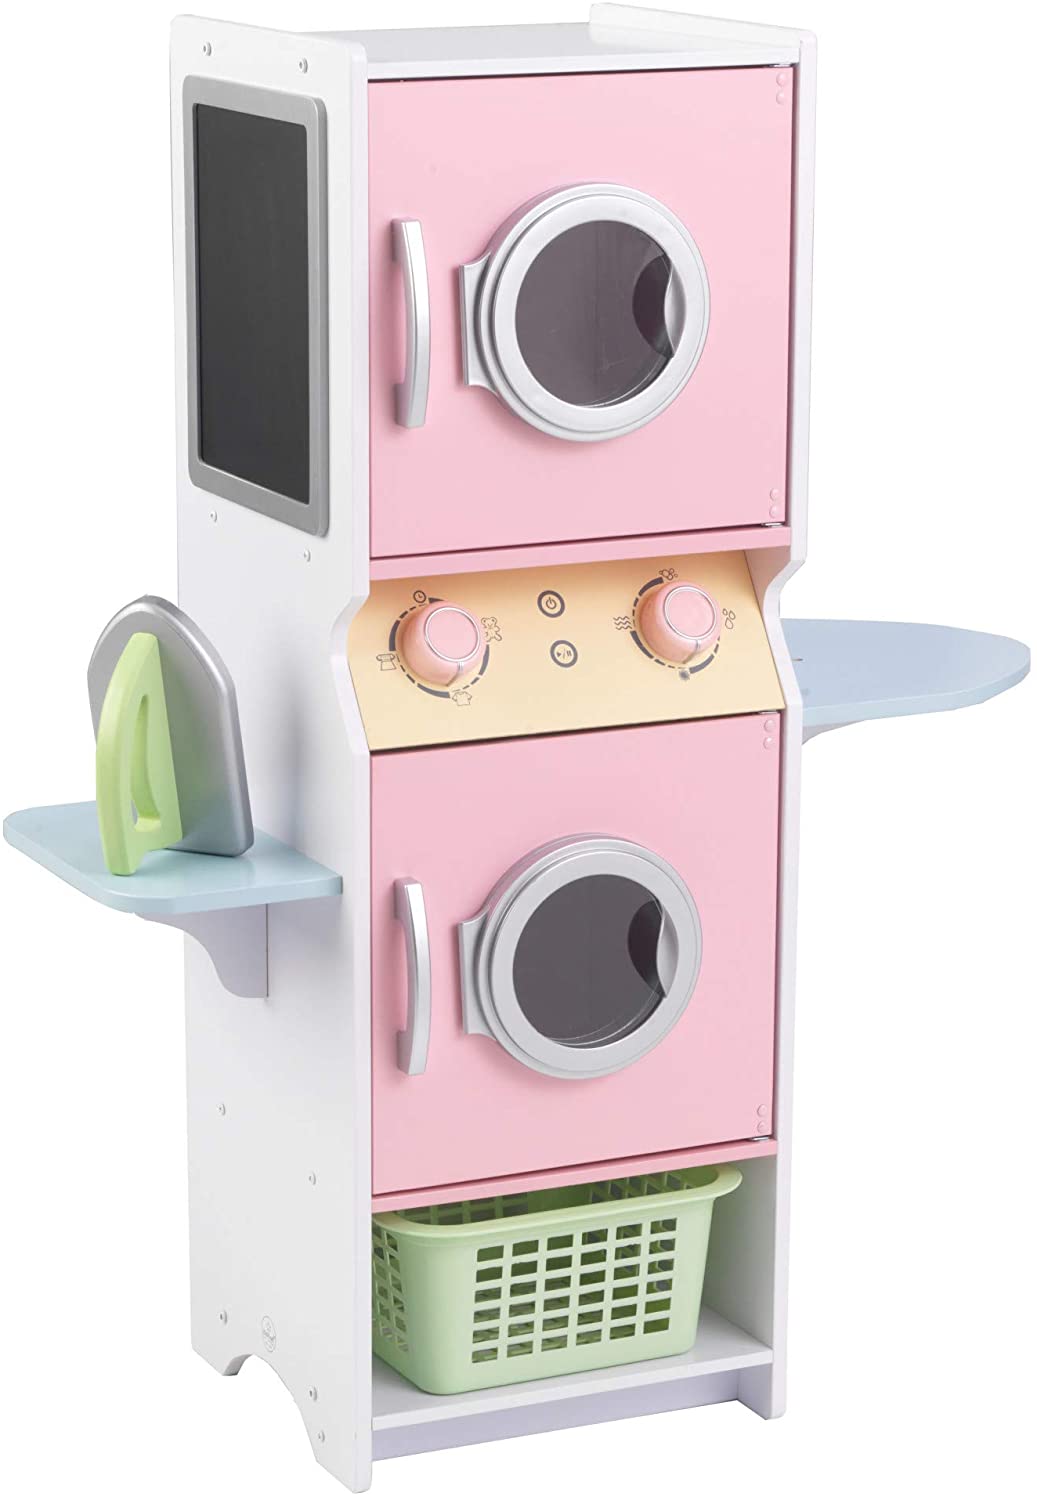 KidKraft Laundry Playset Children's Pretend Wooden Stacking Washer and Dryer Toy with Iron and Basket, Gift for Ages 3+, Pastel